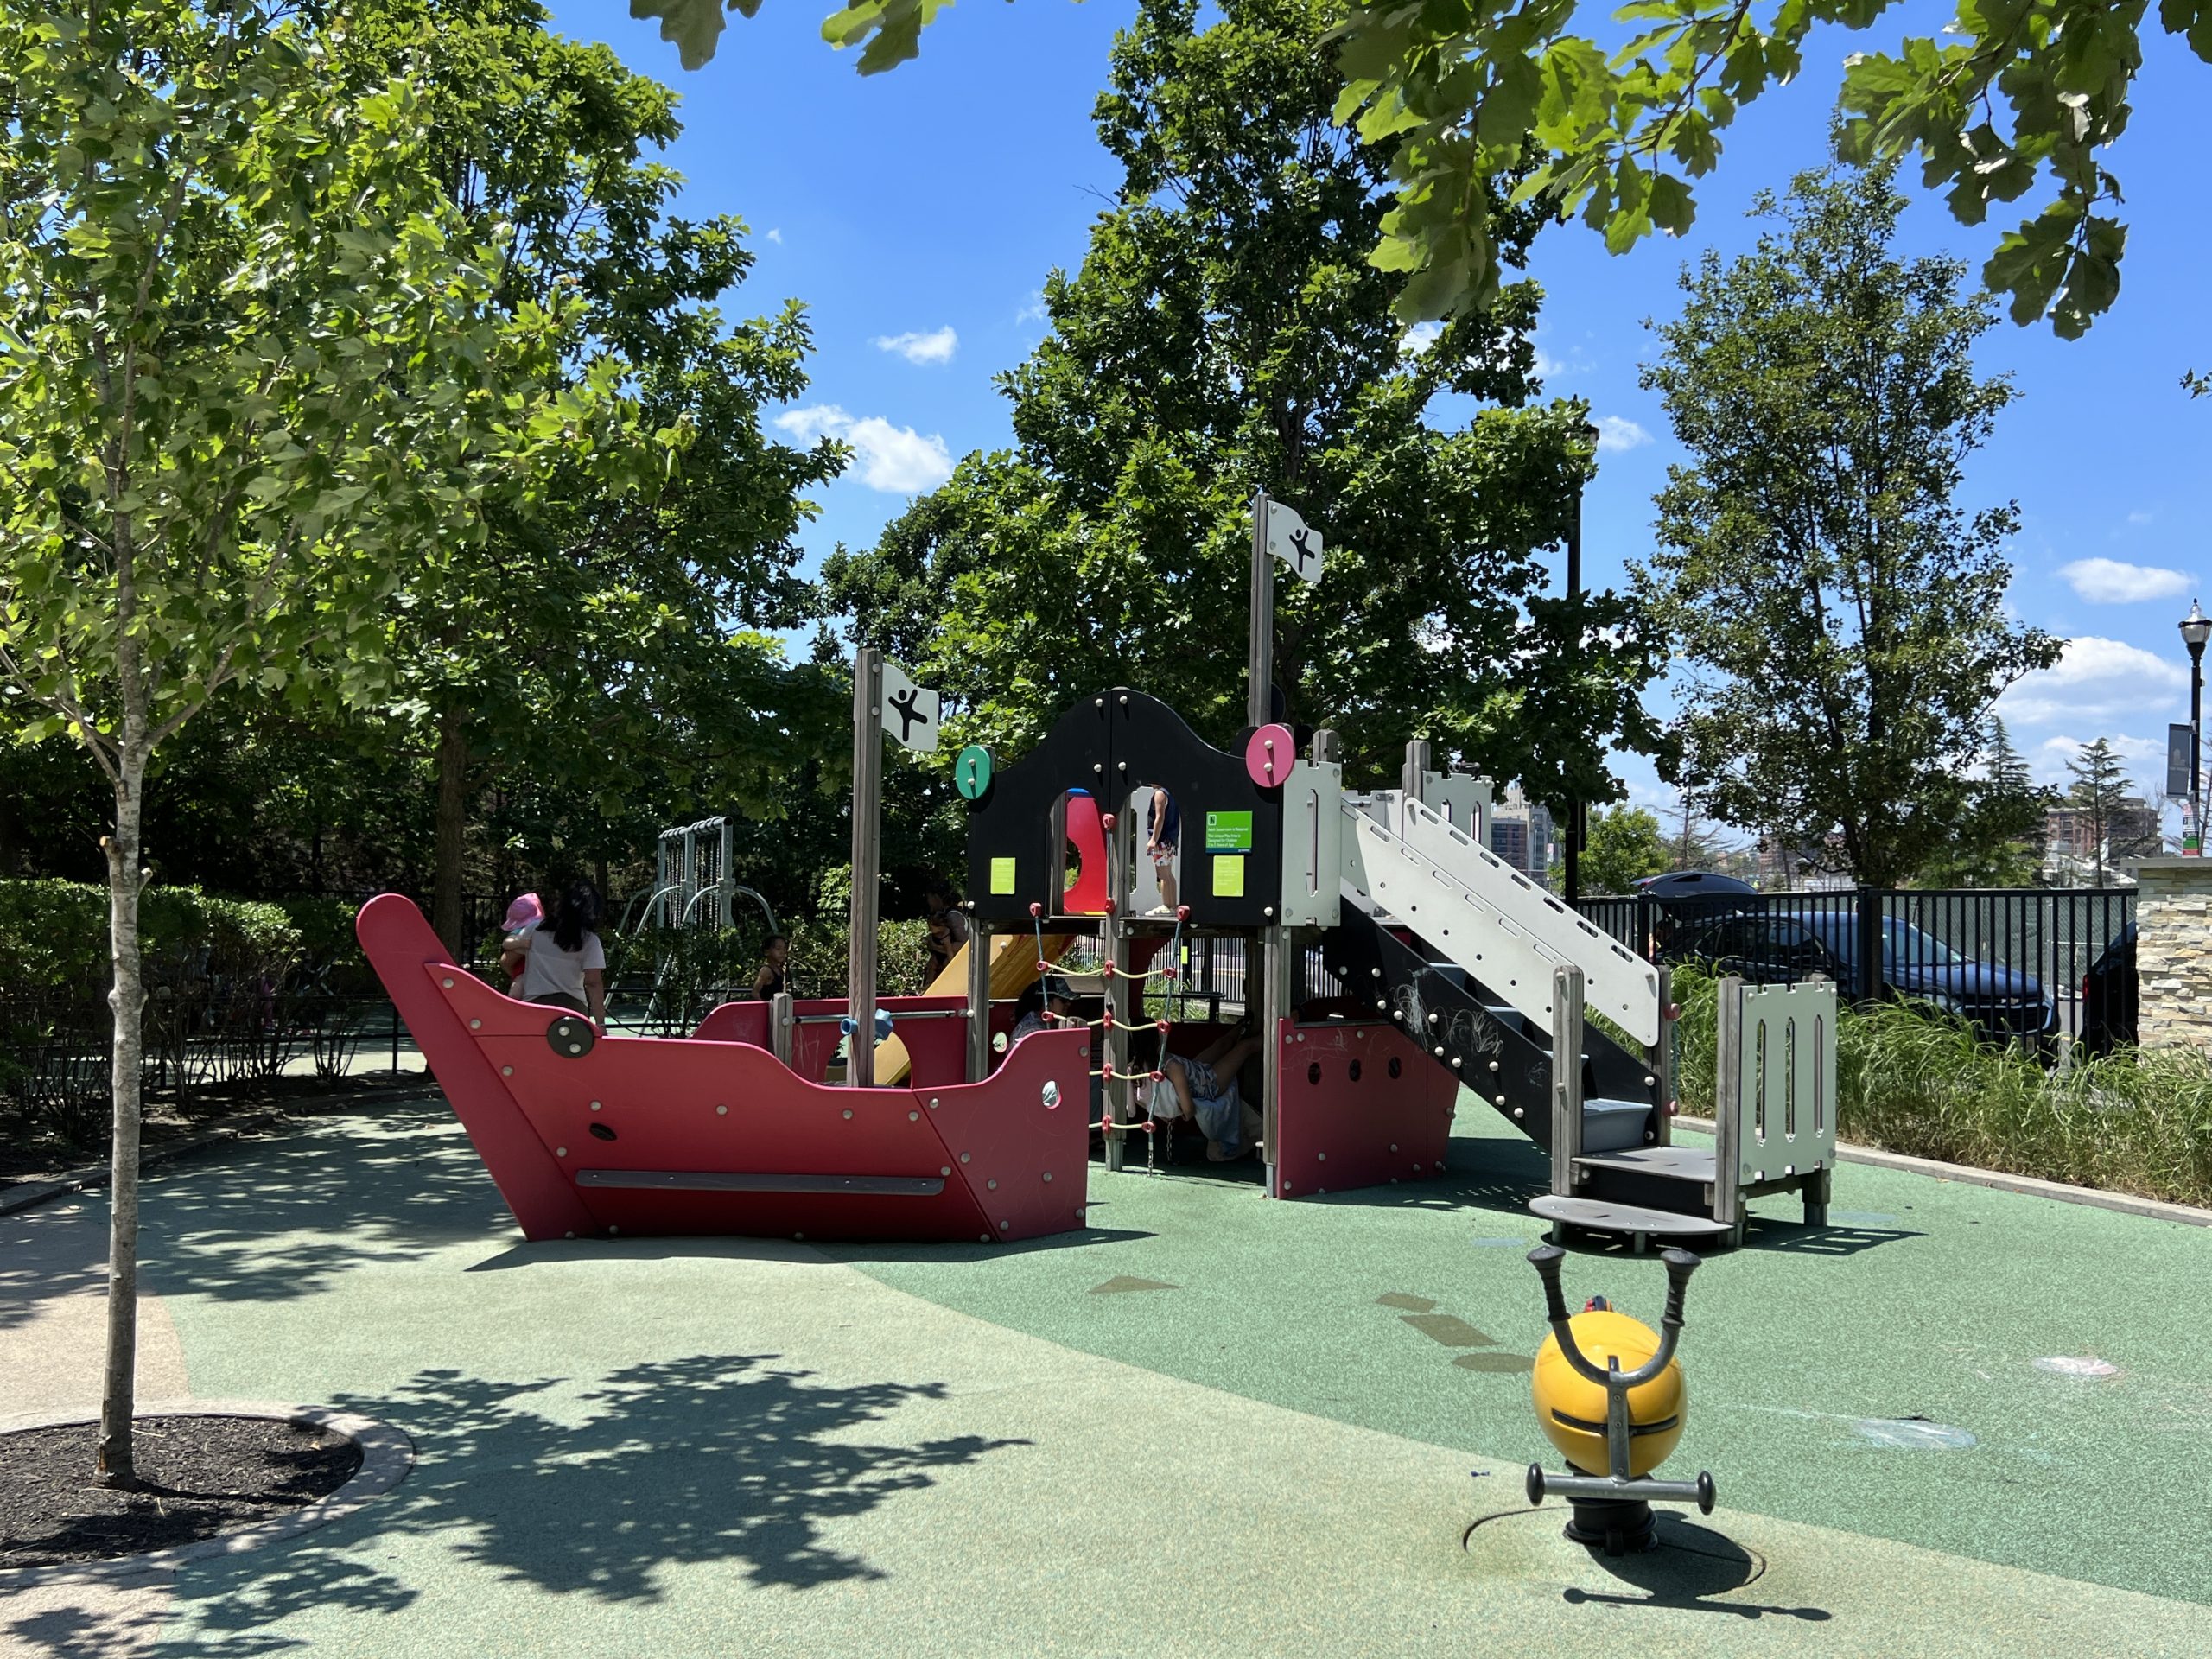 WIDE - Ship playground AT Newport Green Park Playground in Jersey City NJ